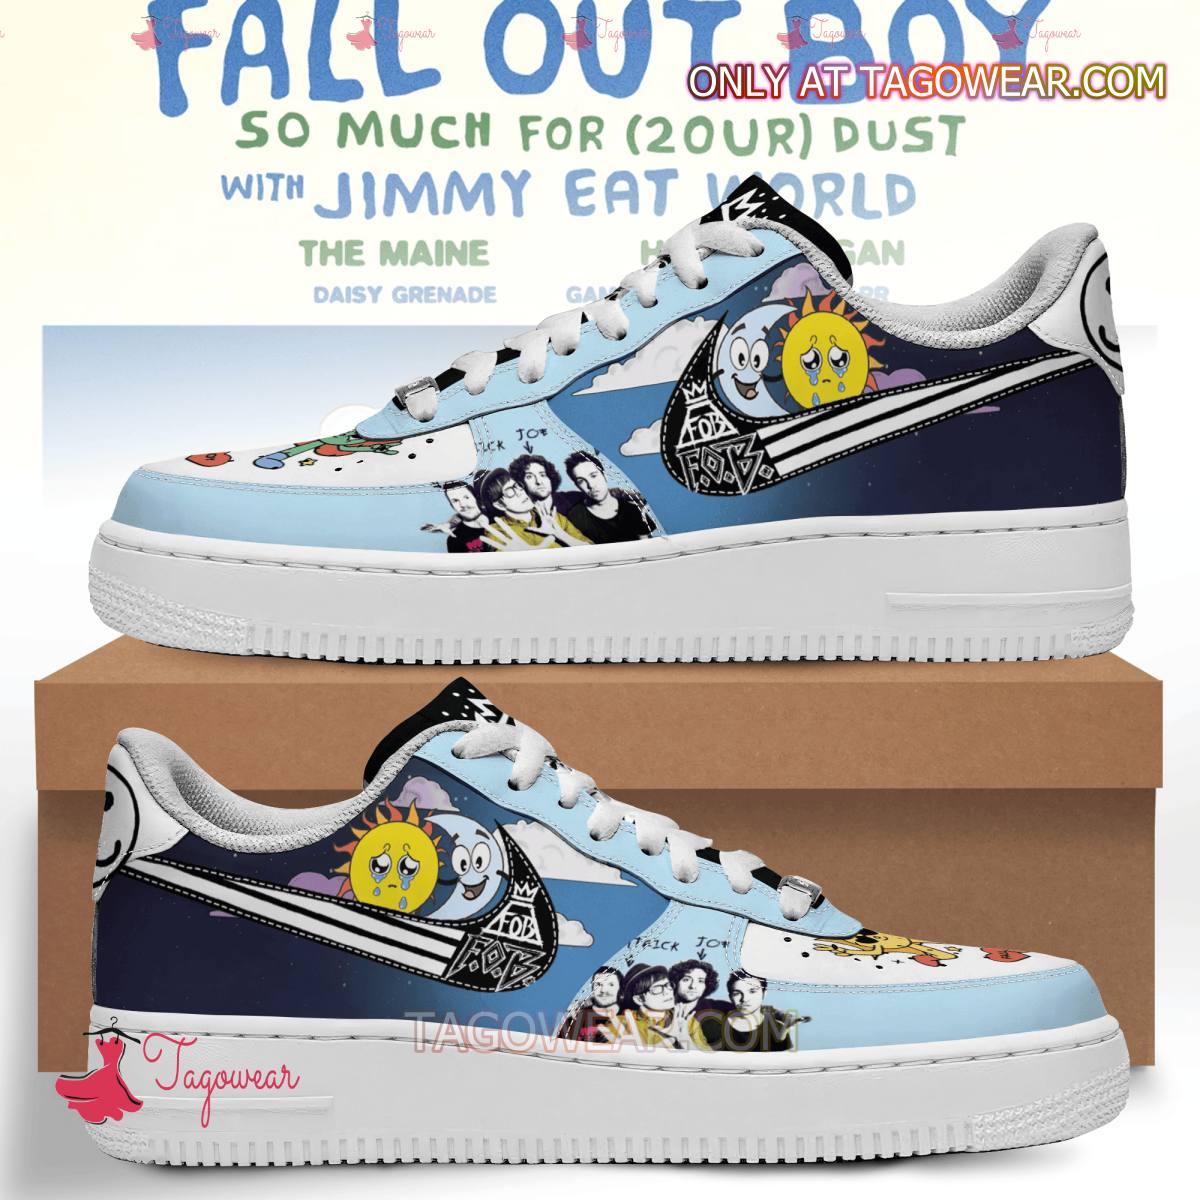 Fall Out Boy Announces So Much For (2our) Dust Air Force Shoes